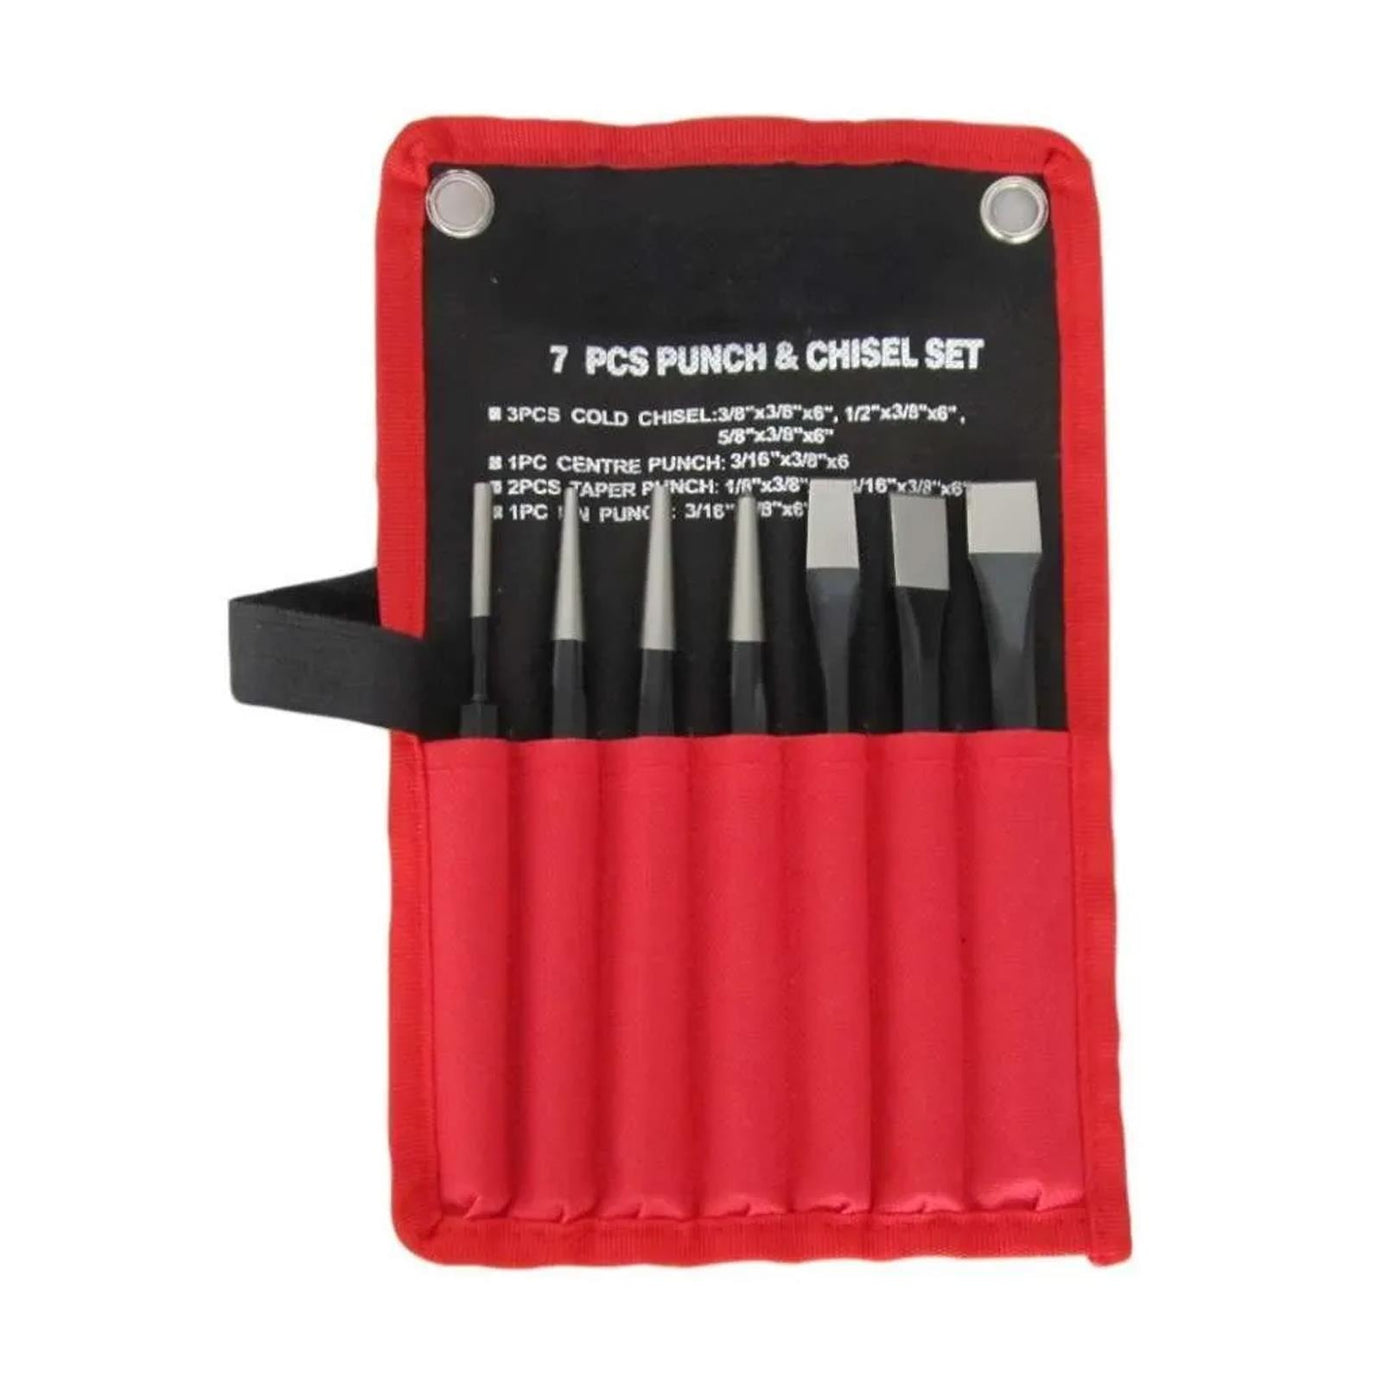 7 piece Punch and Chisel Set Cold Chisels Centre Punch Taper Pin Punches